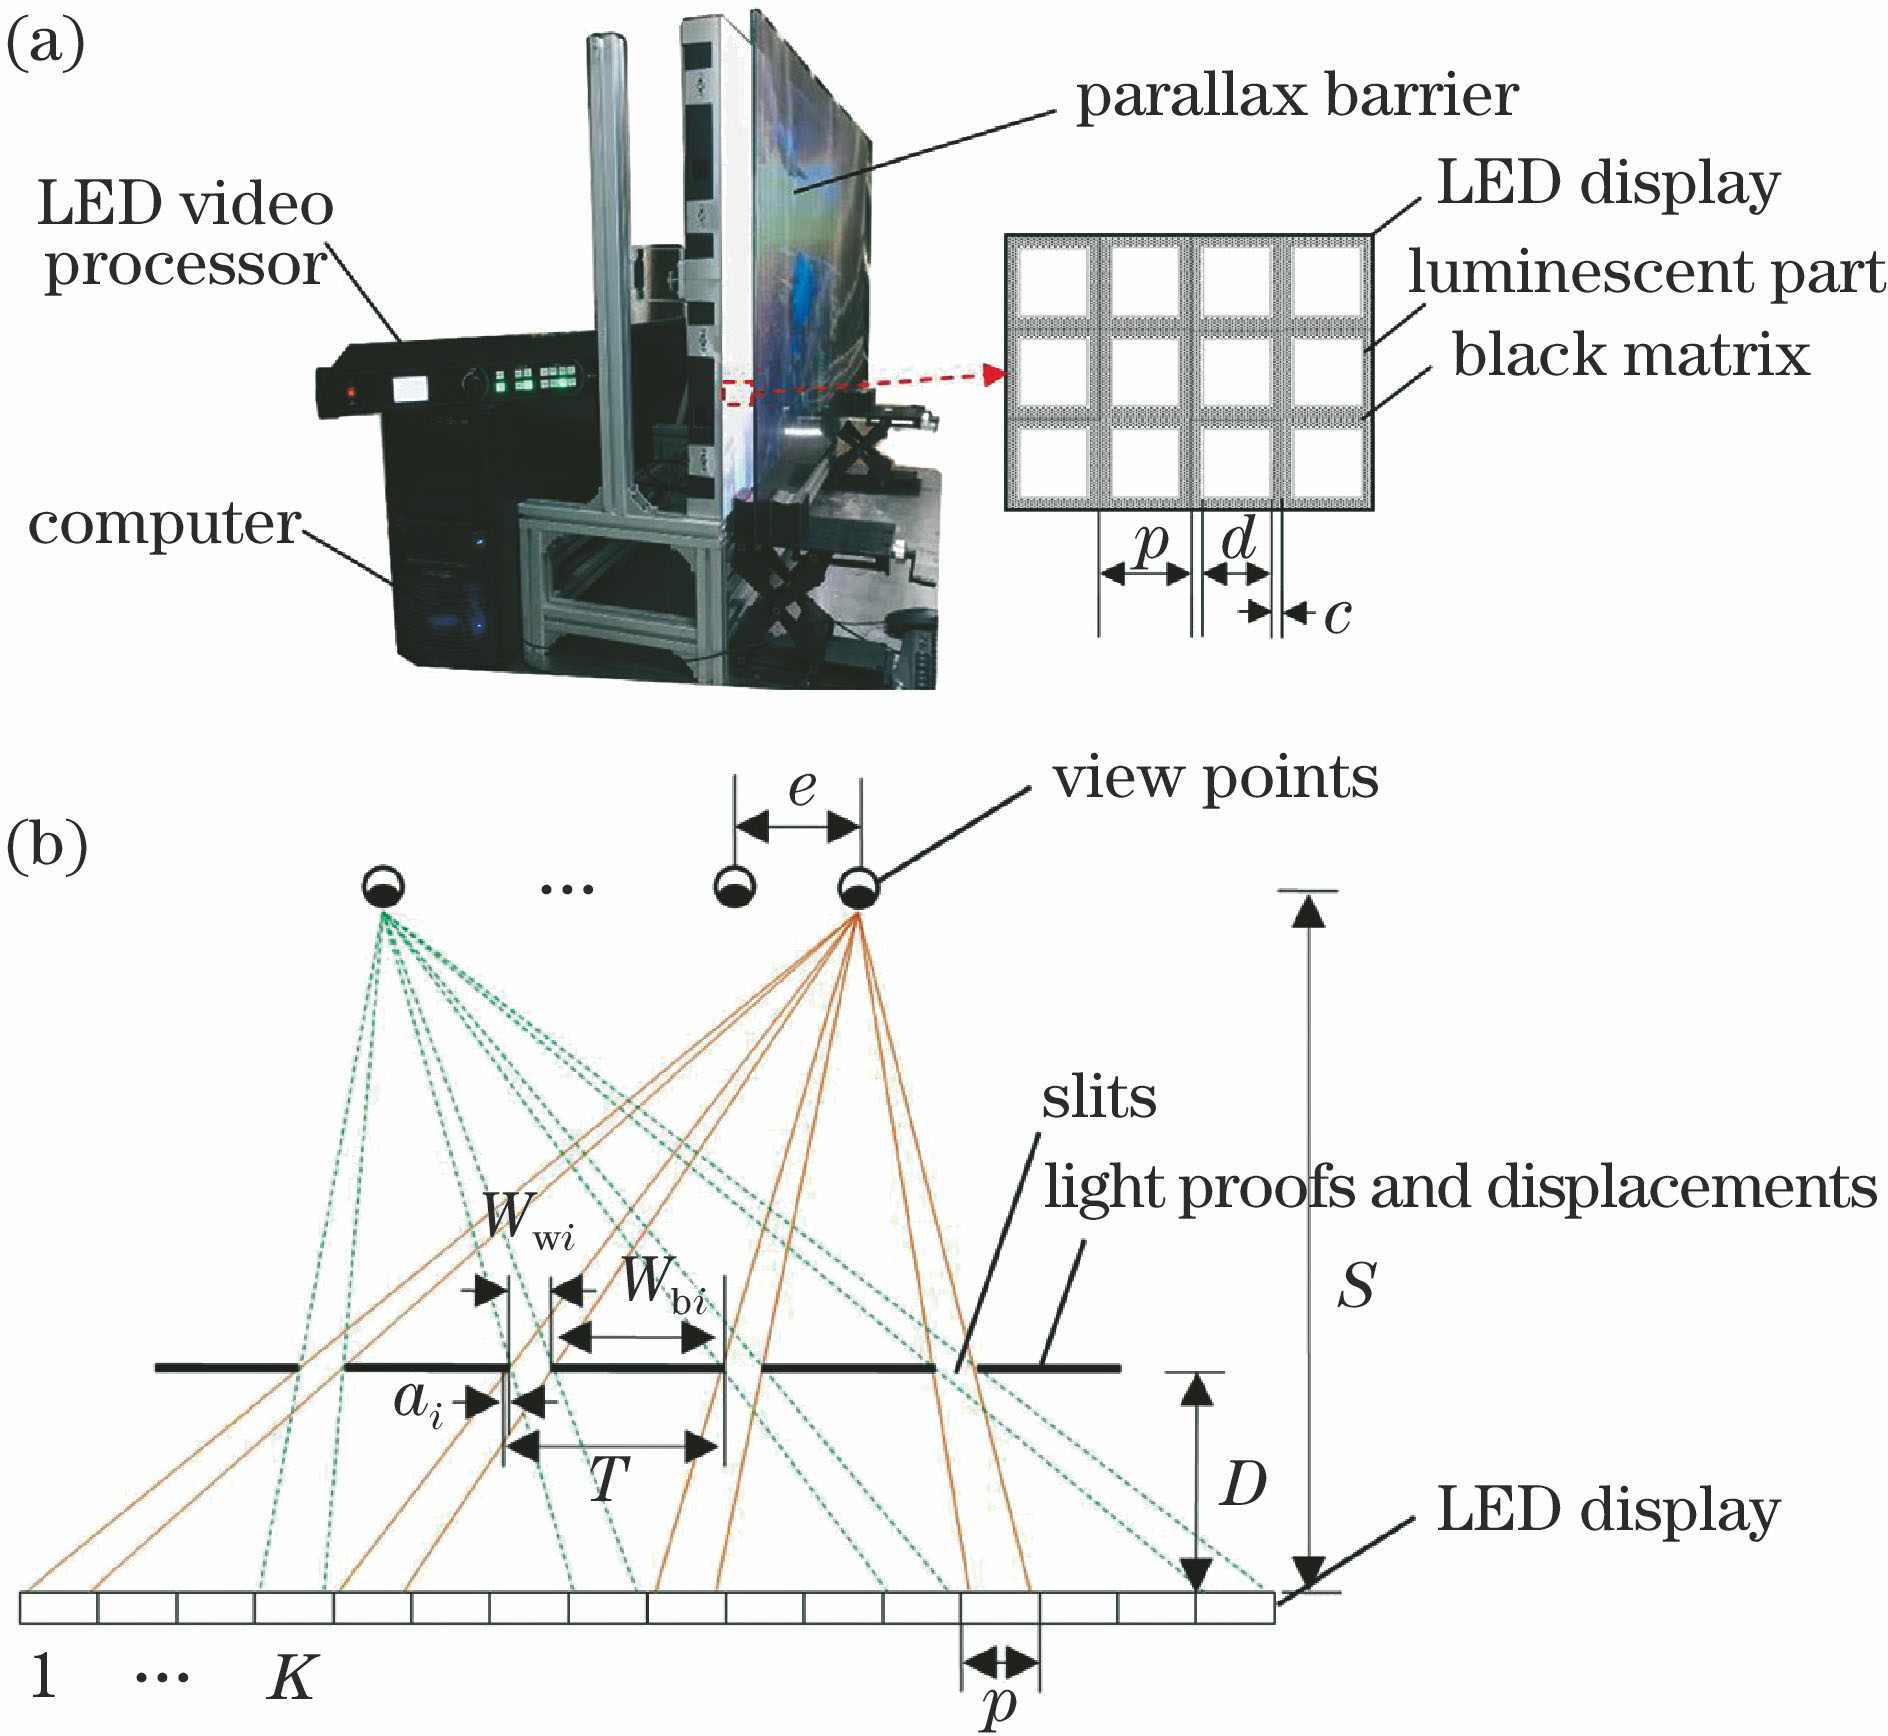 Proposed naked-eye 3D LED display based on the parallax barrier with weakened moiré fringes. (a) Structure; (b) principle